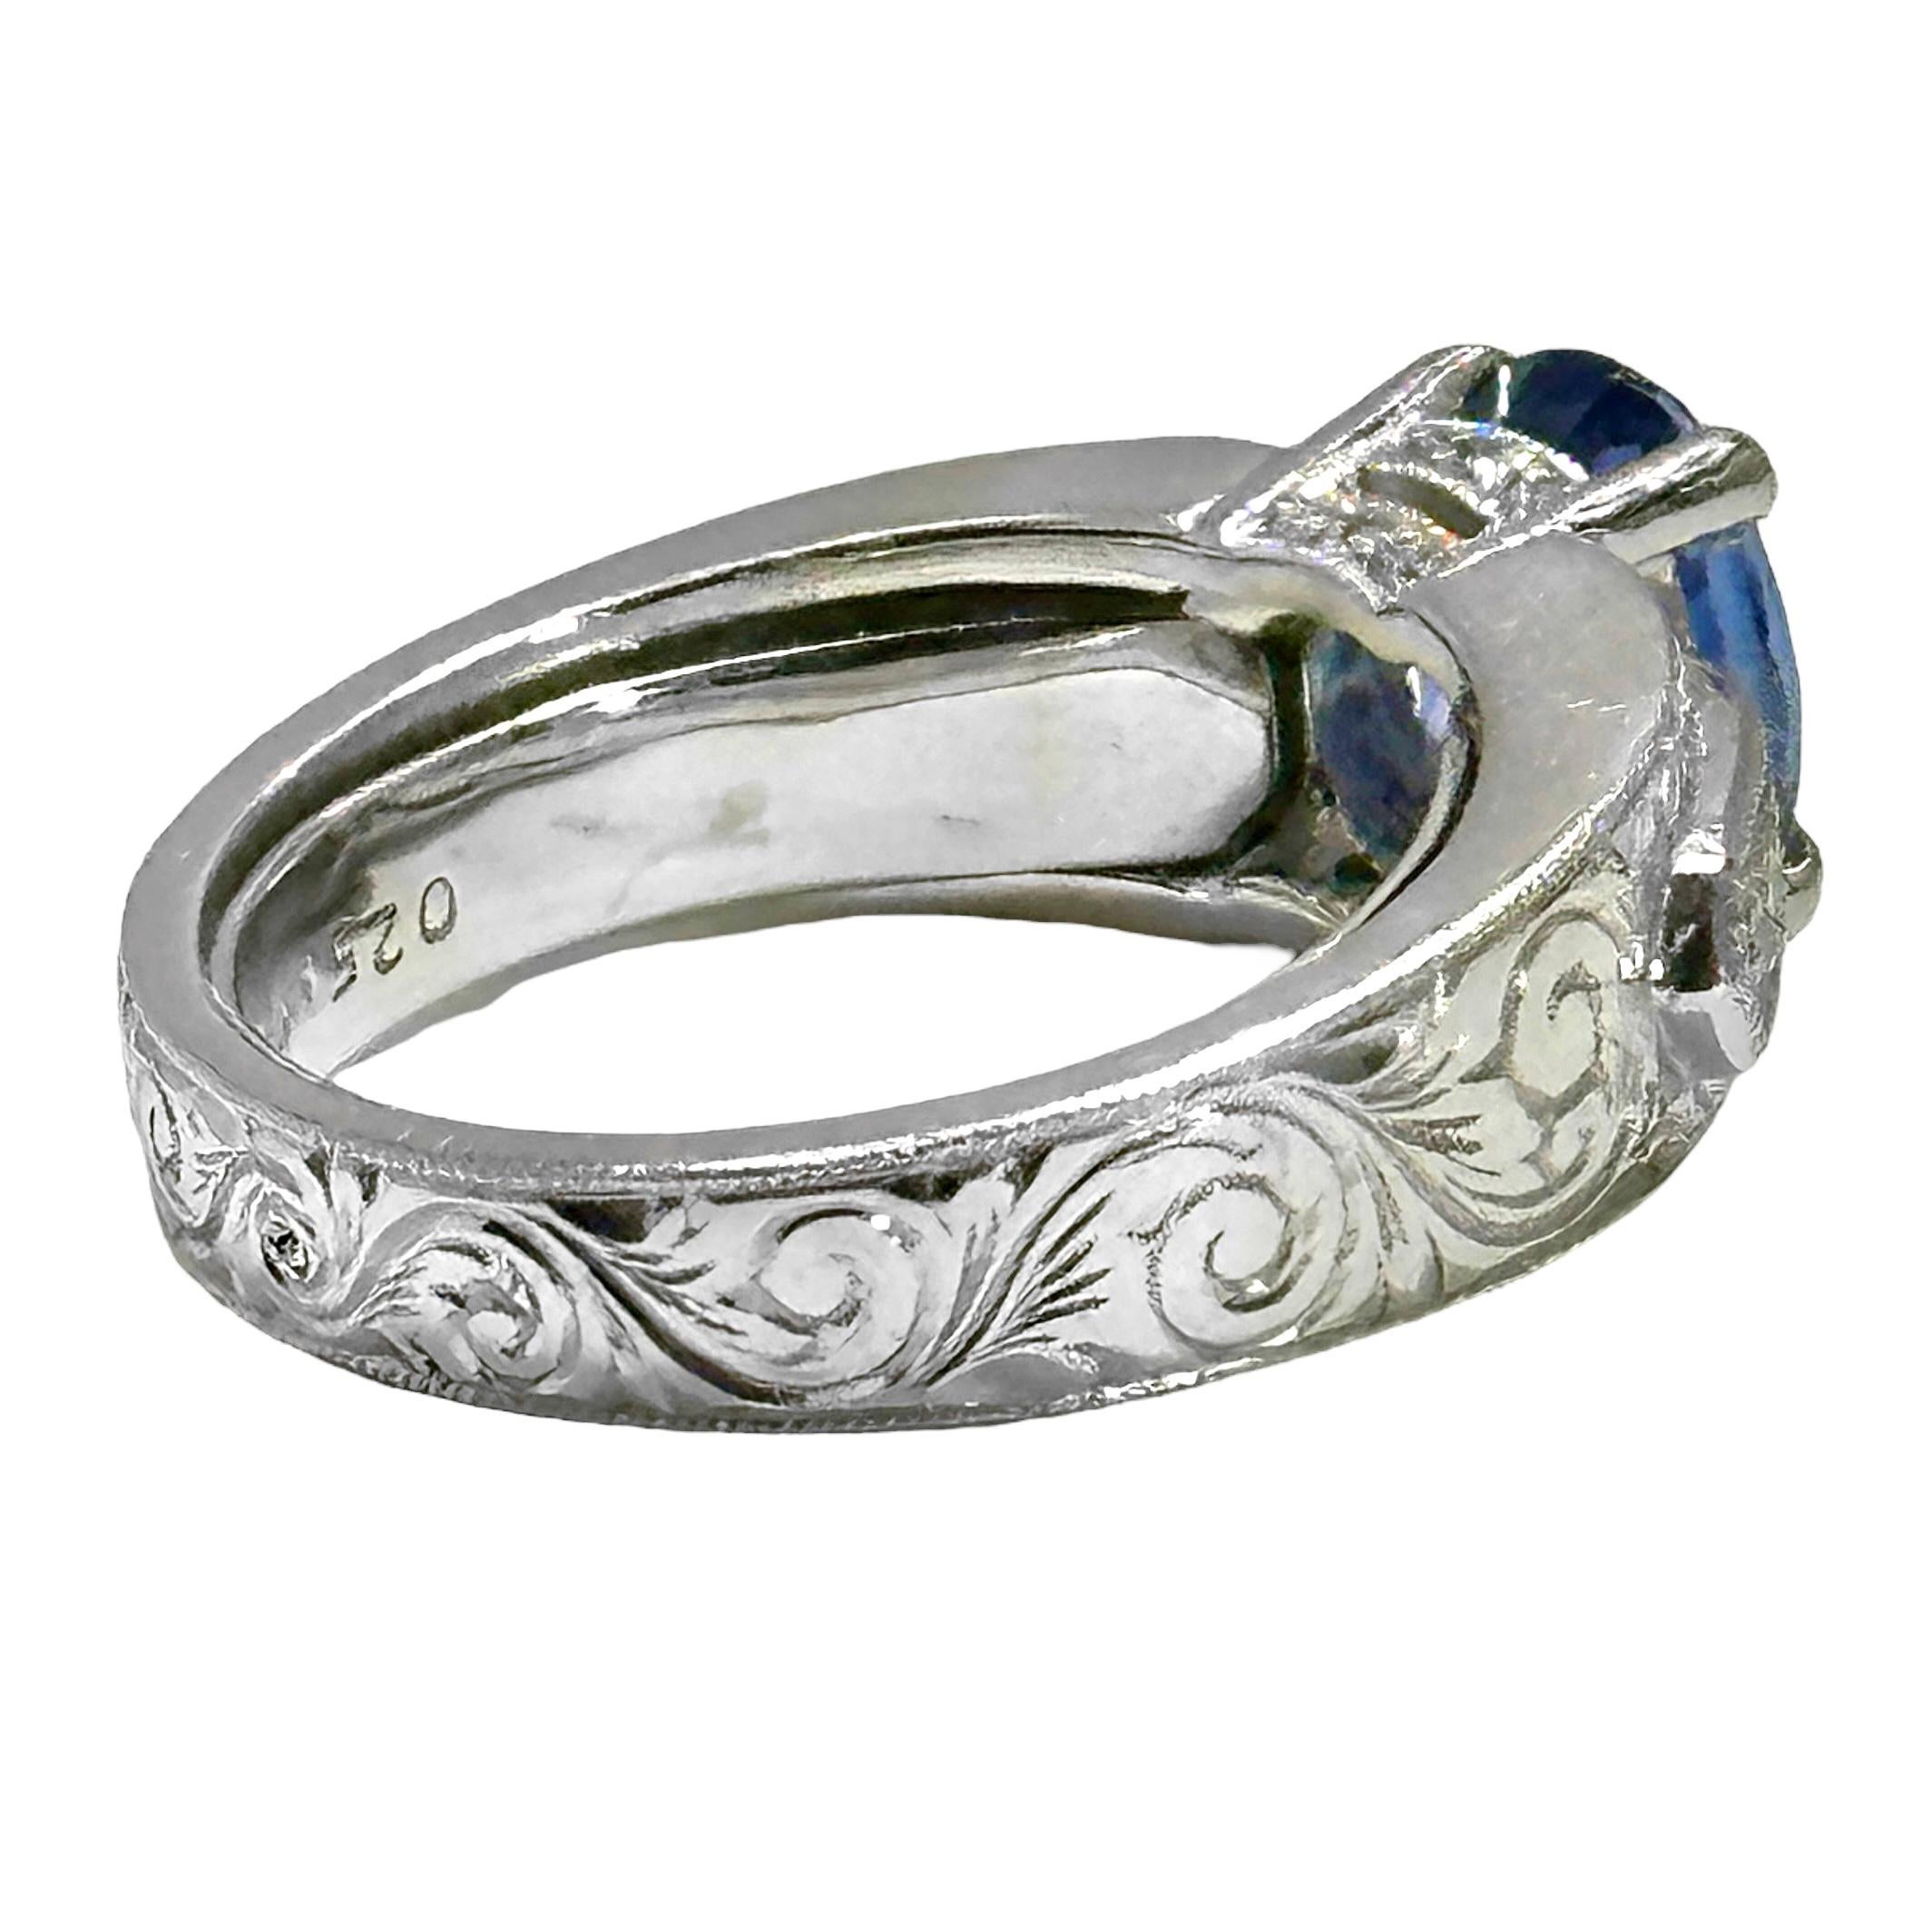 Women's Mid-20th Century Hand Engraved Platinum, Sapphire, and Diamond Cocktail Ring For Sale